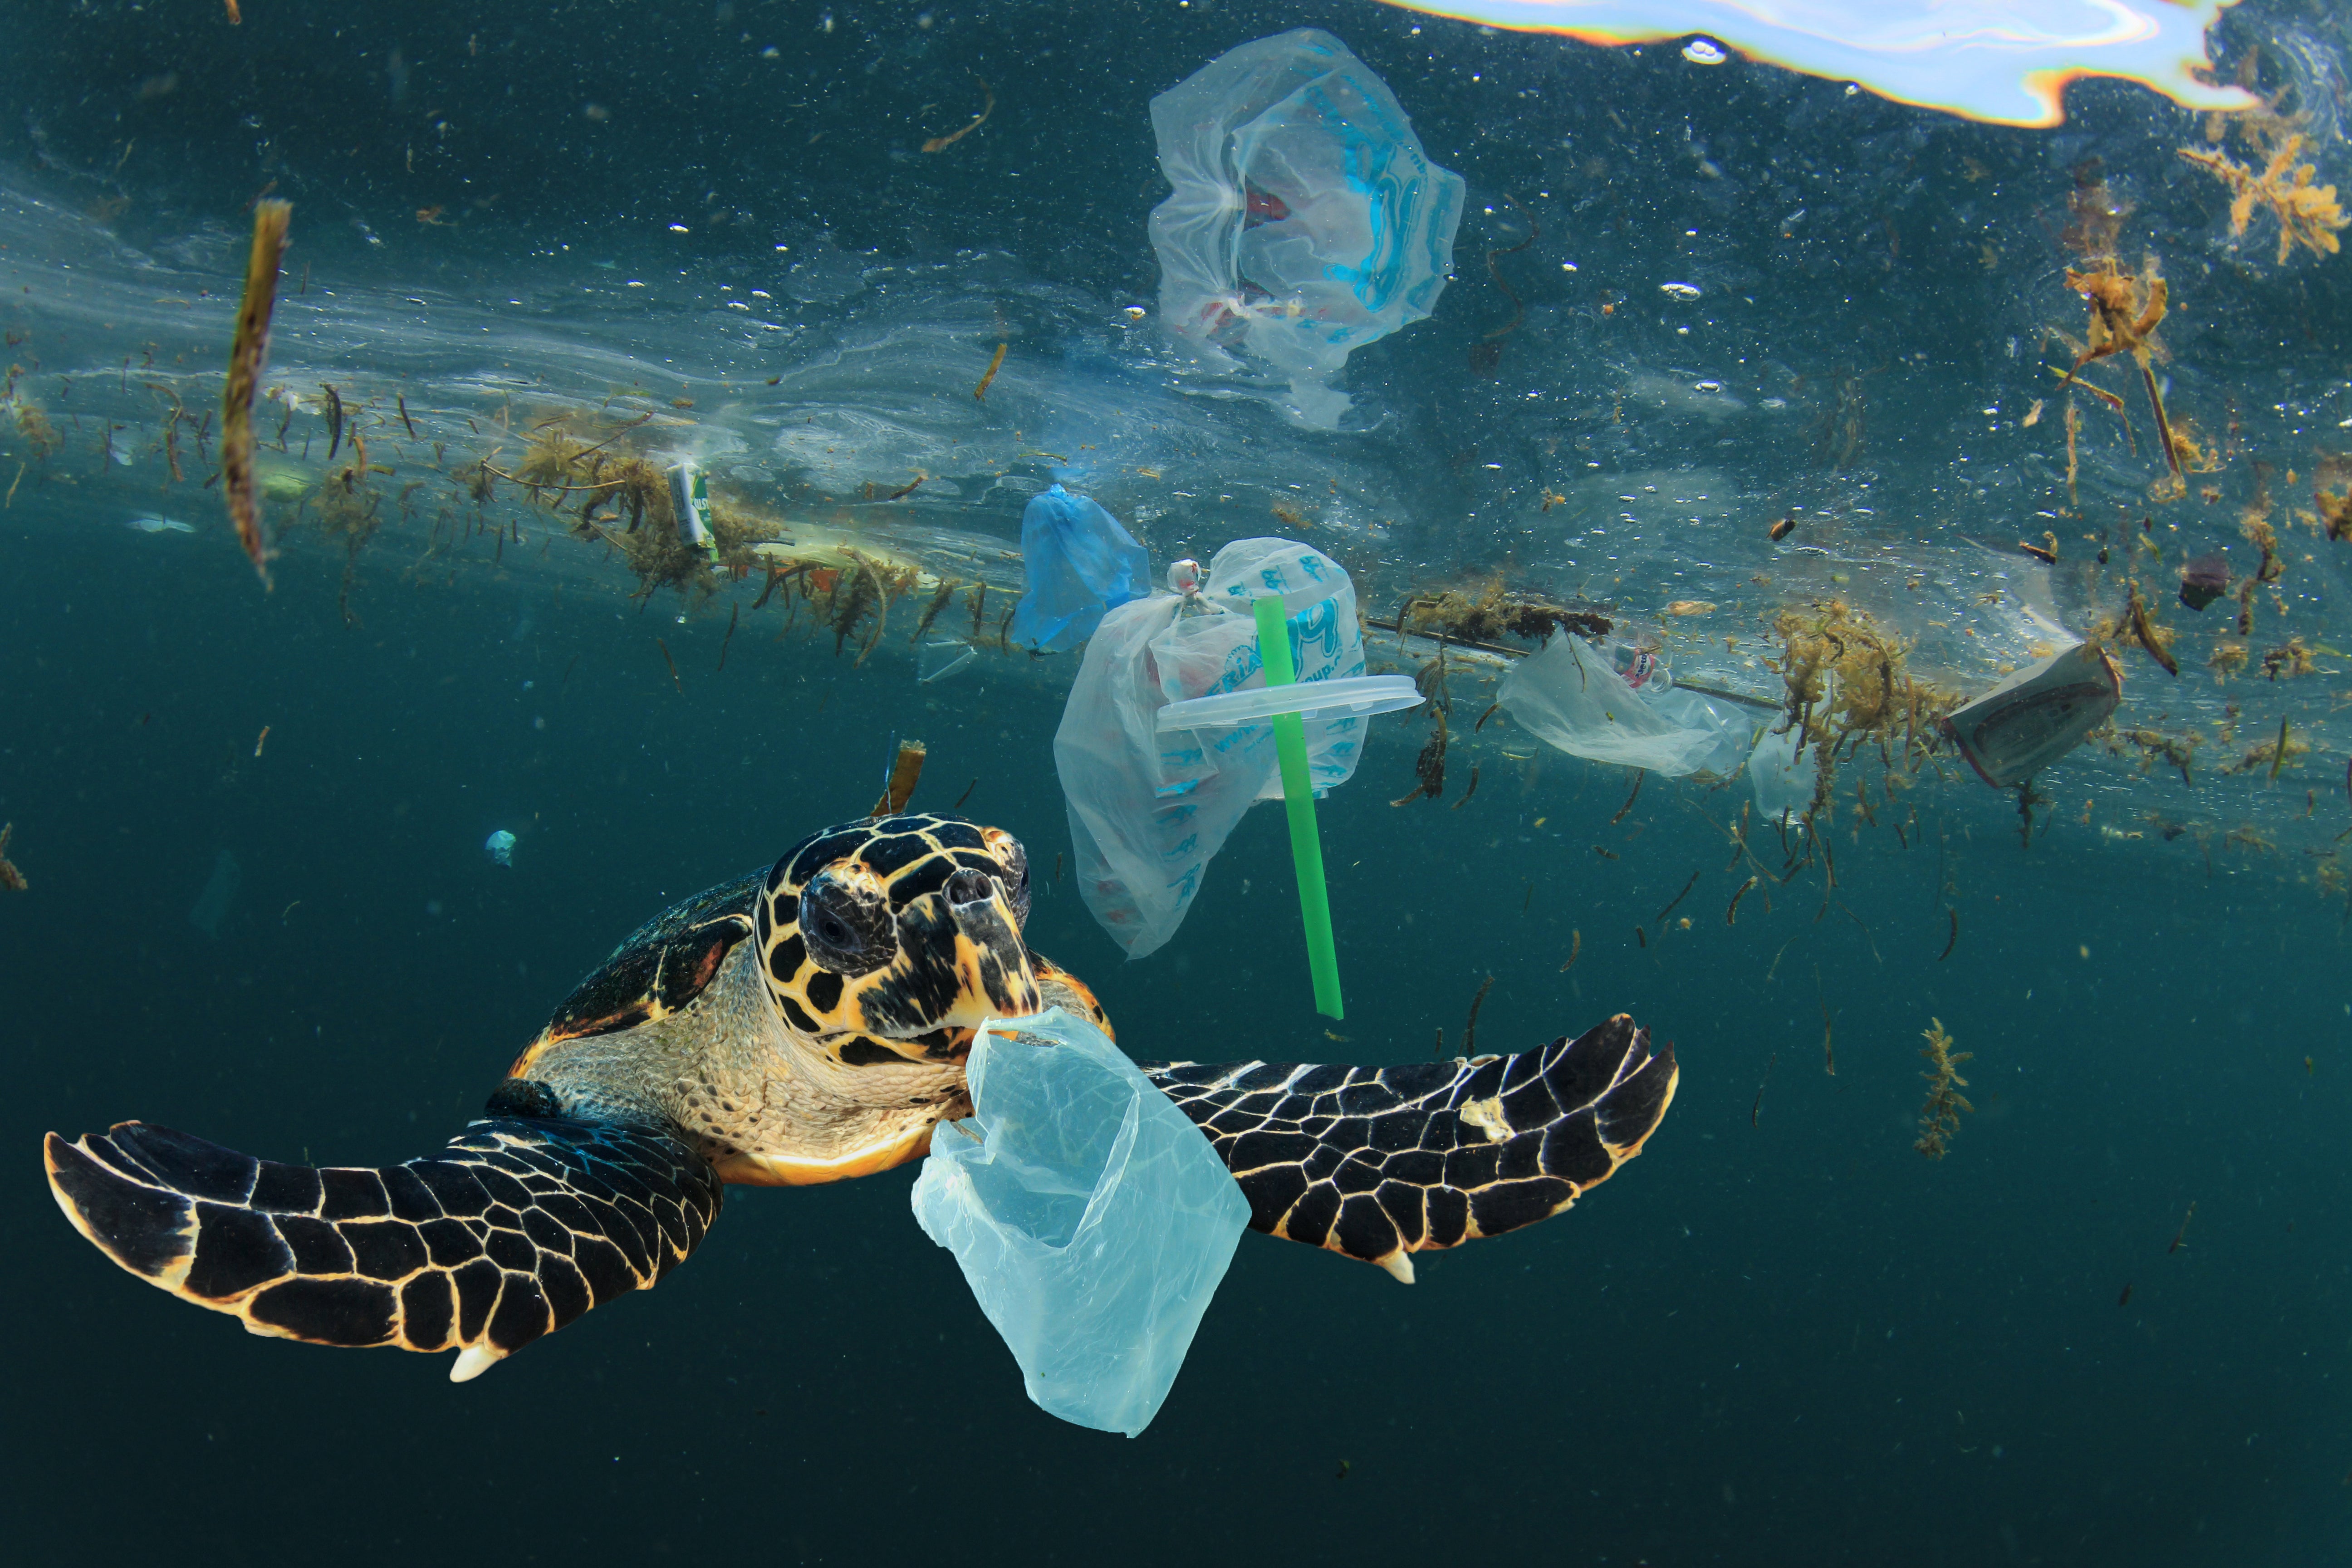 What stood out for us as an immediate environmental crisis was the ocean plastics emergency